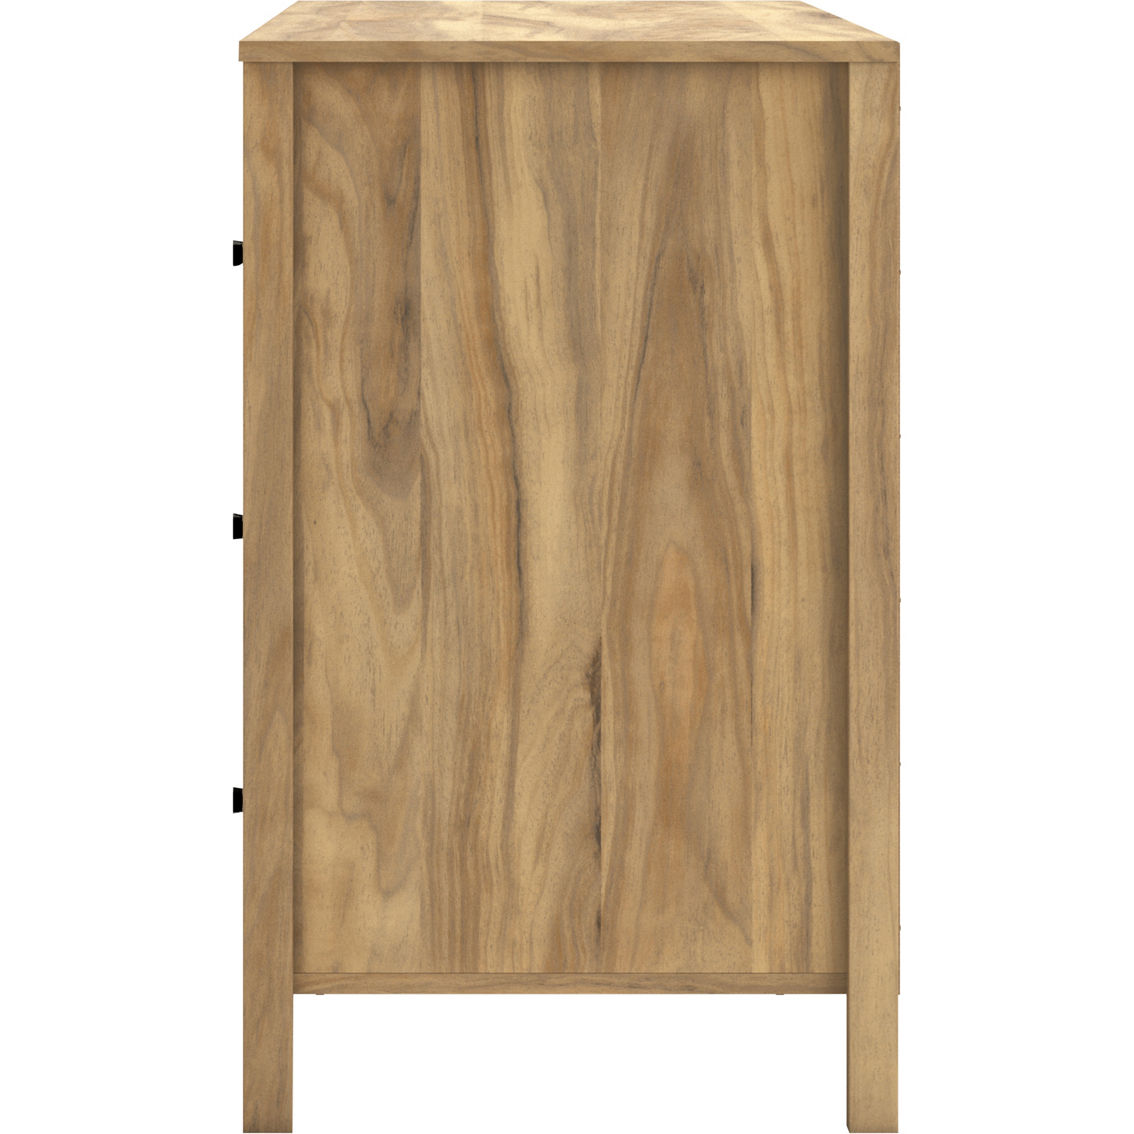 Signature Design by Ashley Bermacy Ready-To-Assemble Dresser - Image 3 of 7